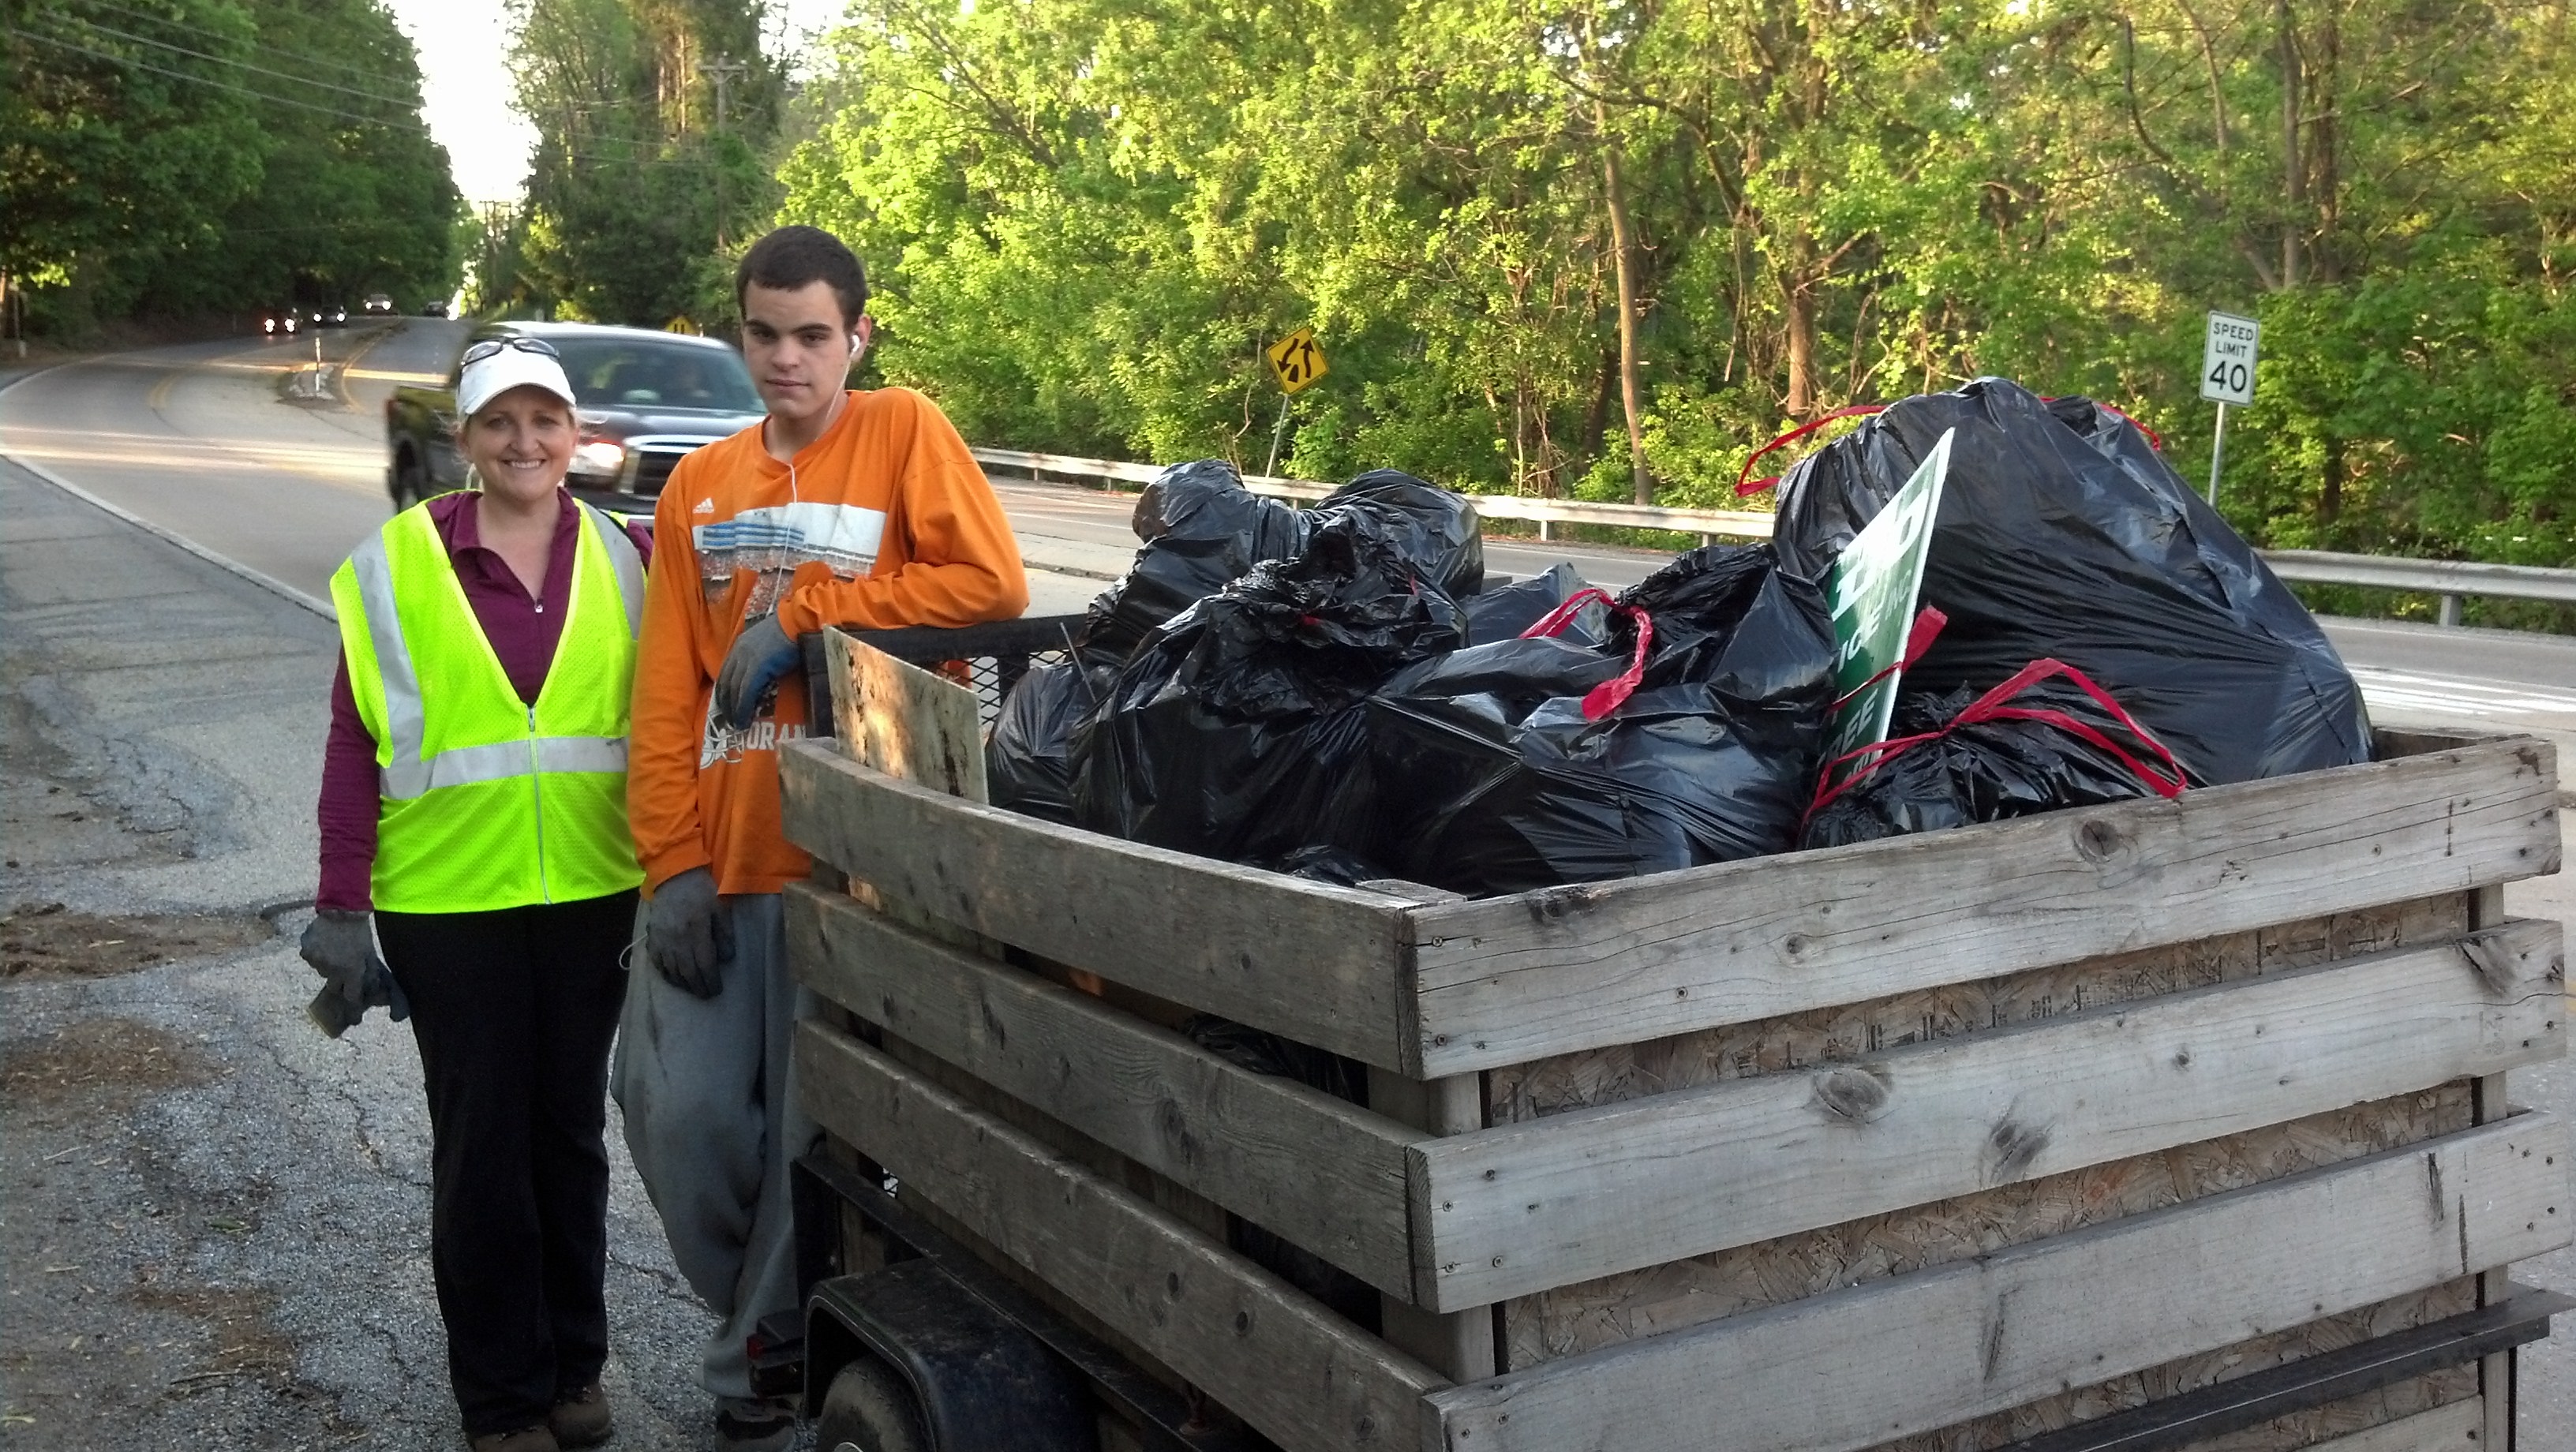 kelly mcdowell volunteers to pick up trash along the roadside in chester county pennsylvania